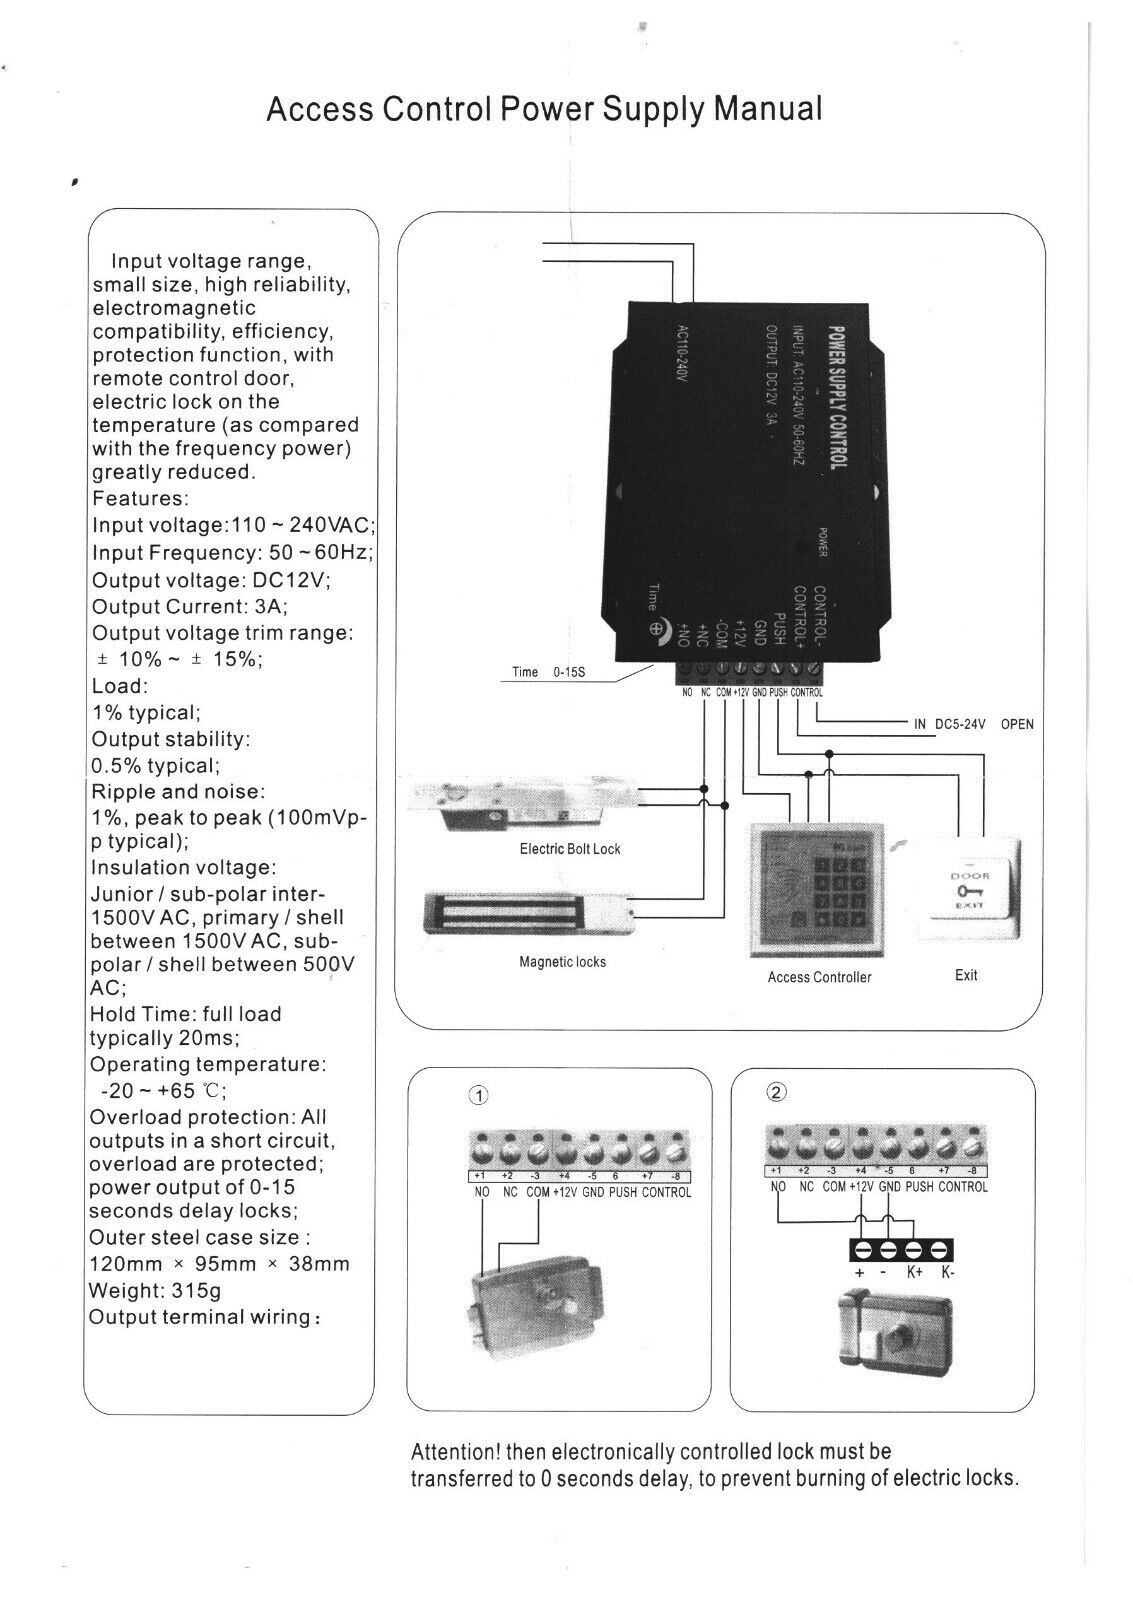 Mini Switching Access Controller Power Supply Supplier,12VDC 3A,110-240VAC